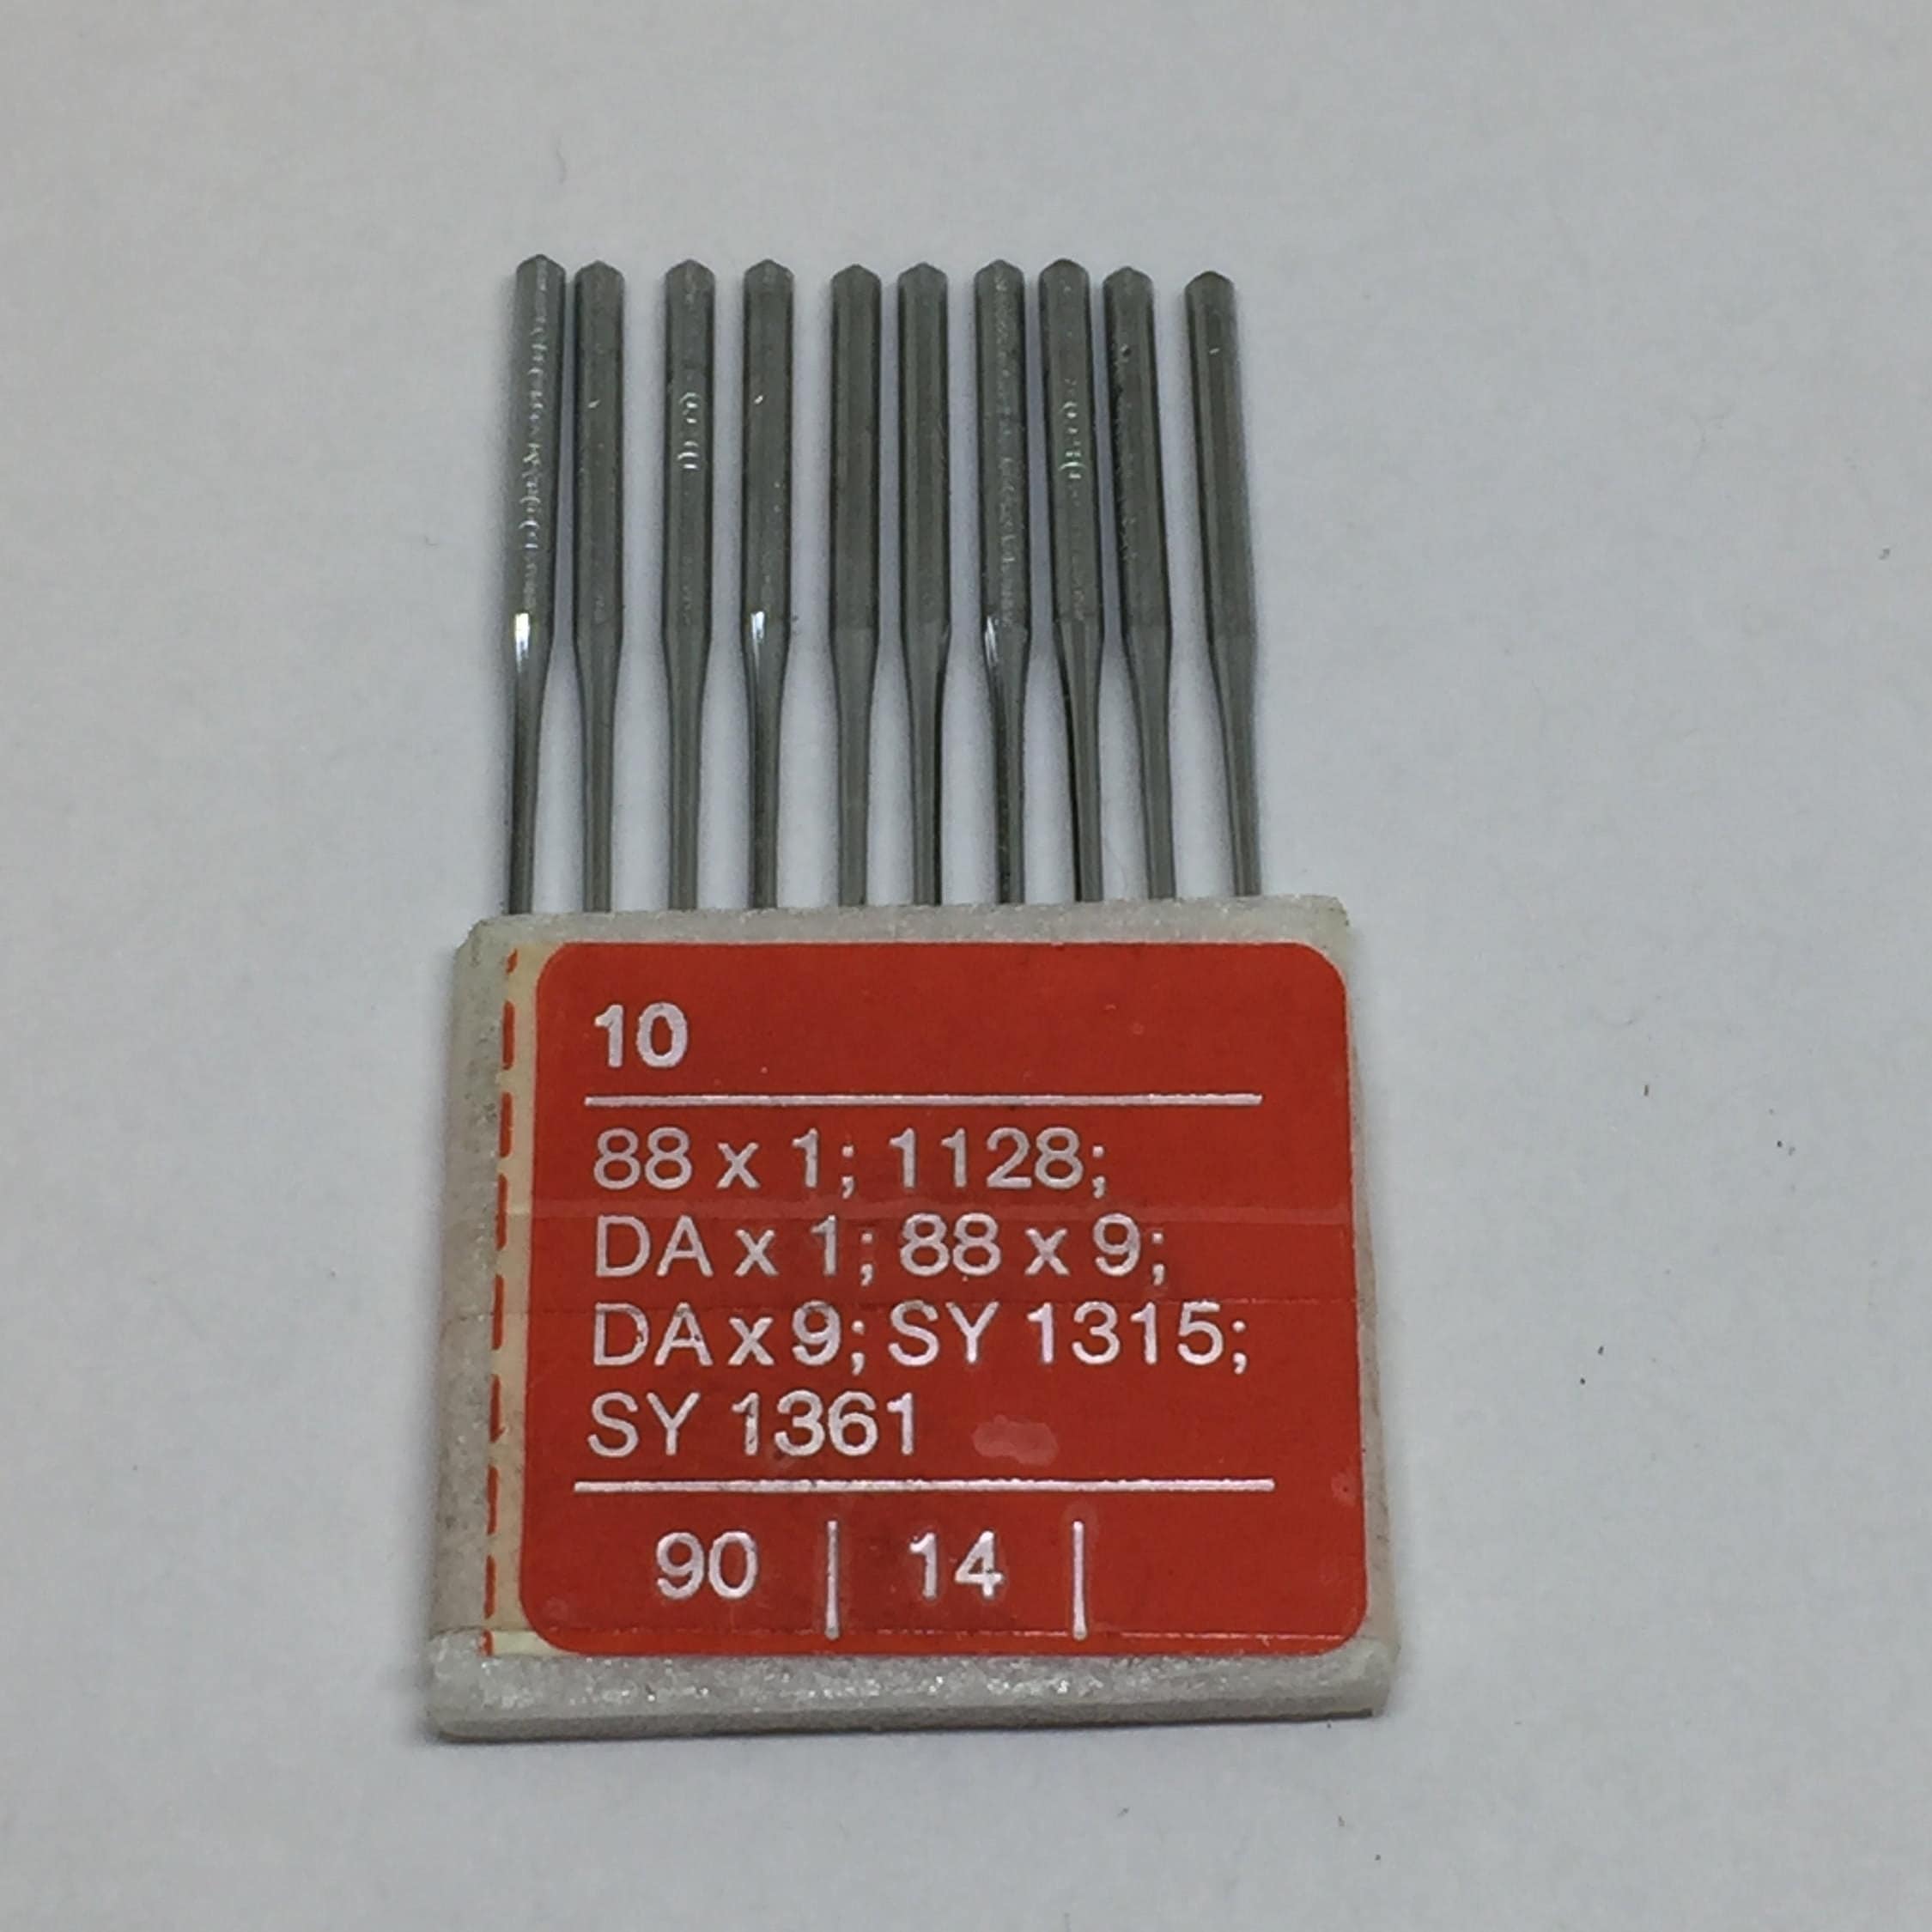 16x231 16x257 Dbx1 Sewing Machine Needles Singer Brother Consew Size 160/23  Made in Germany 